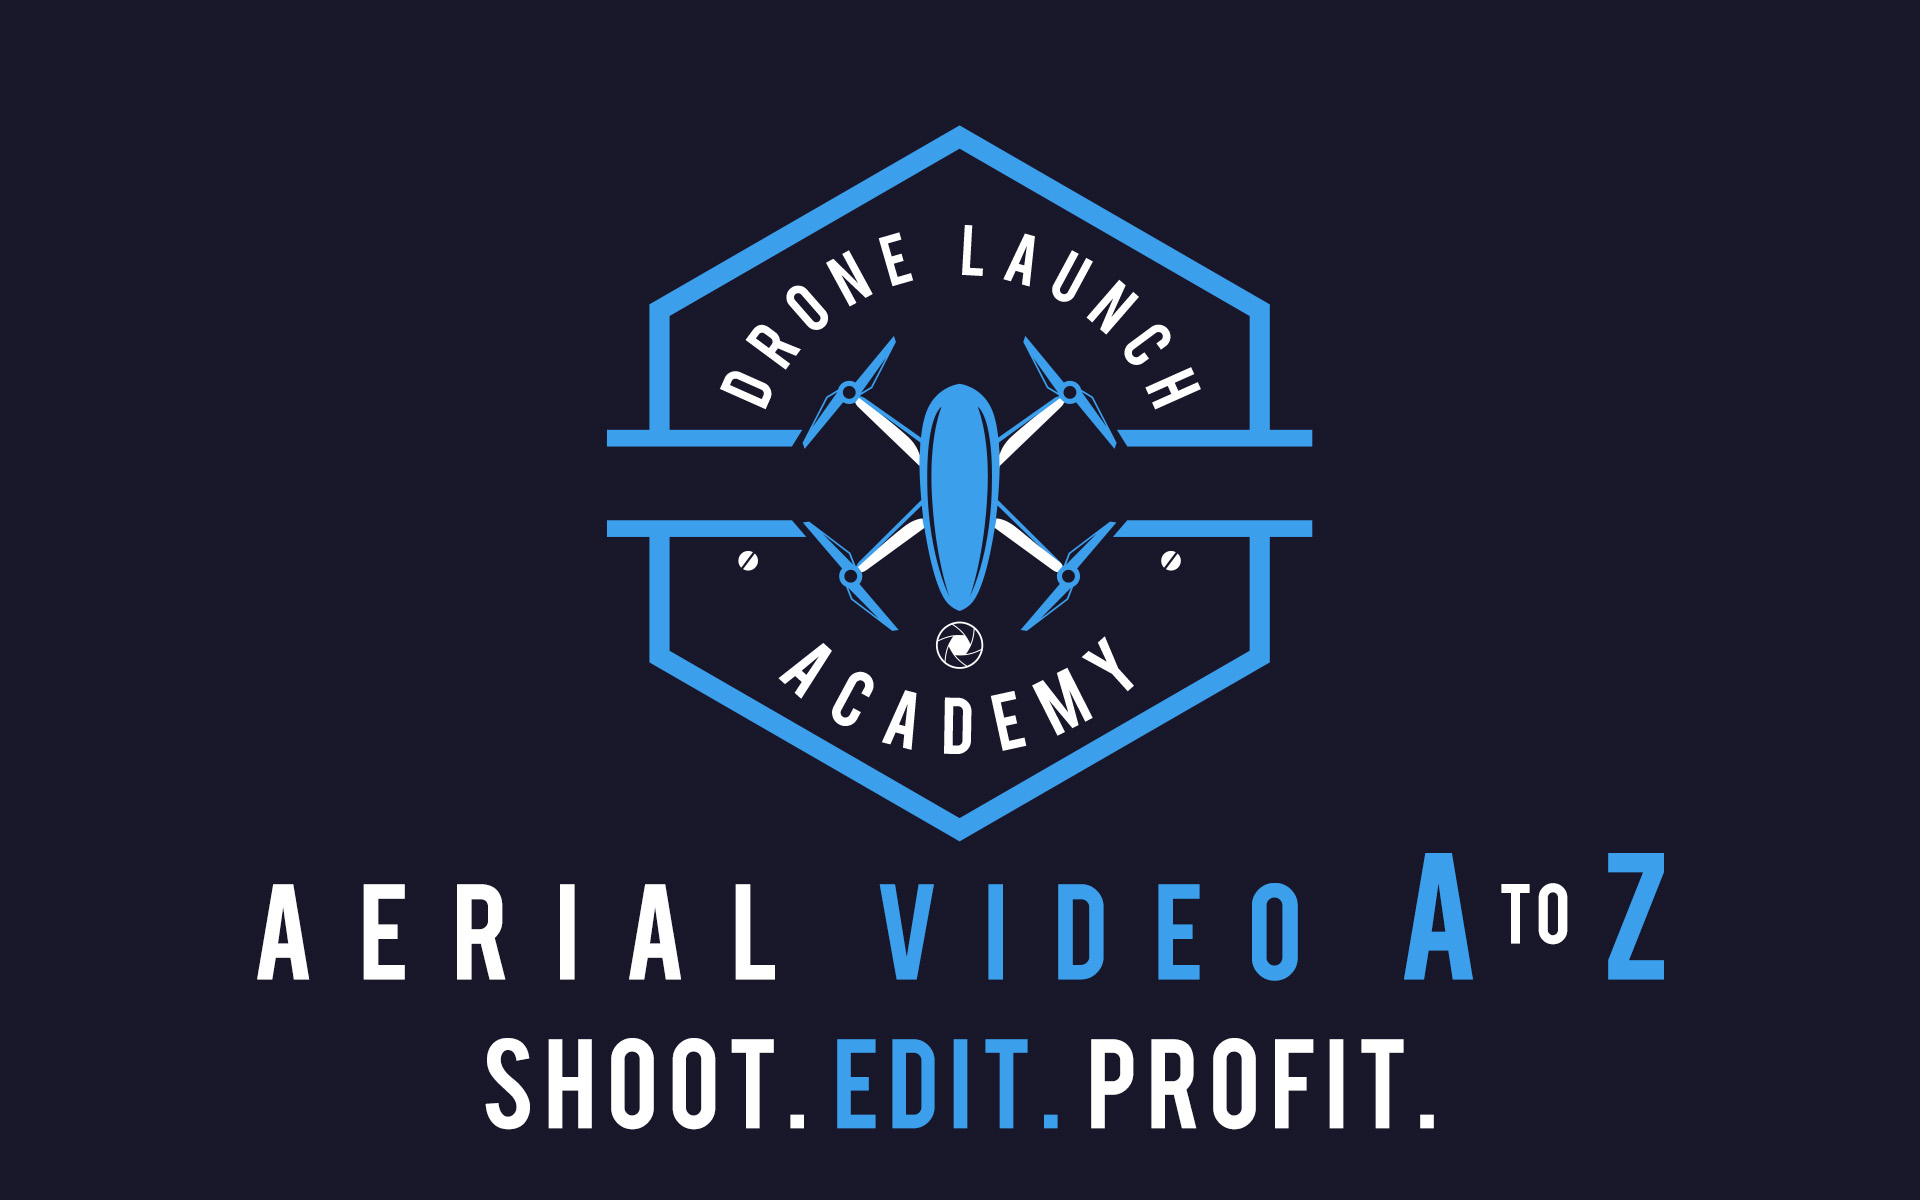 Aerial Video A to Z | Drone Launch Academy, LLC